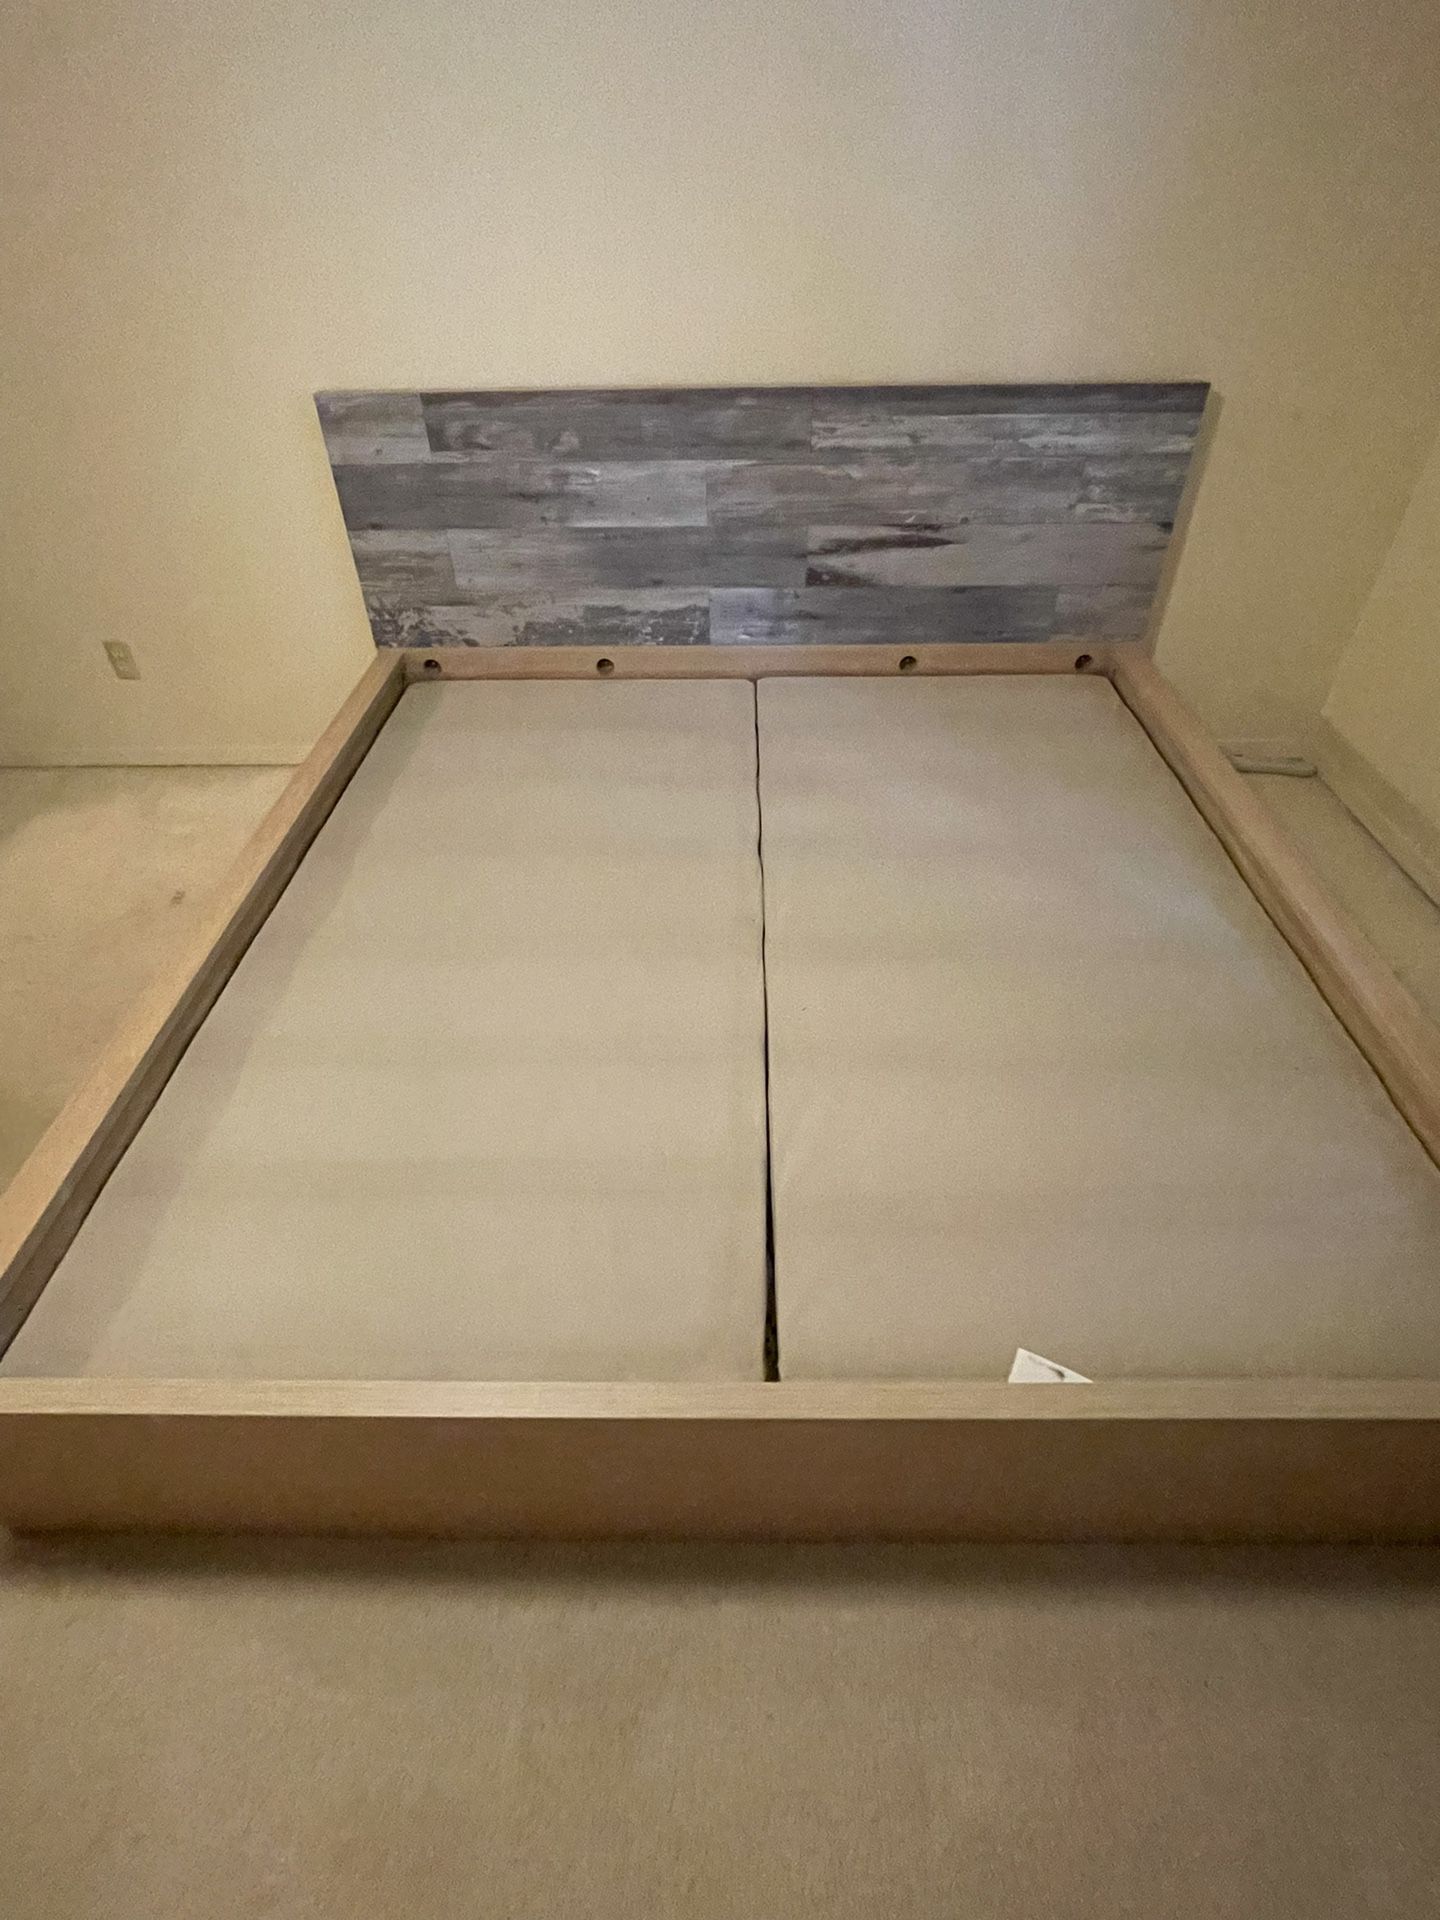 IKEA King Malm Bed Frame (mattress not included)